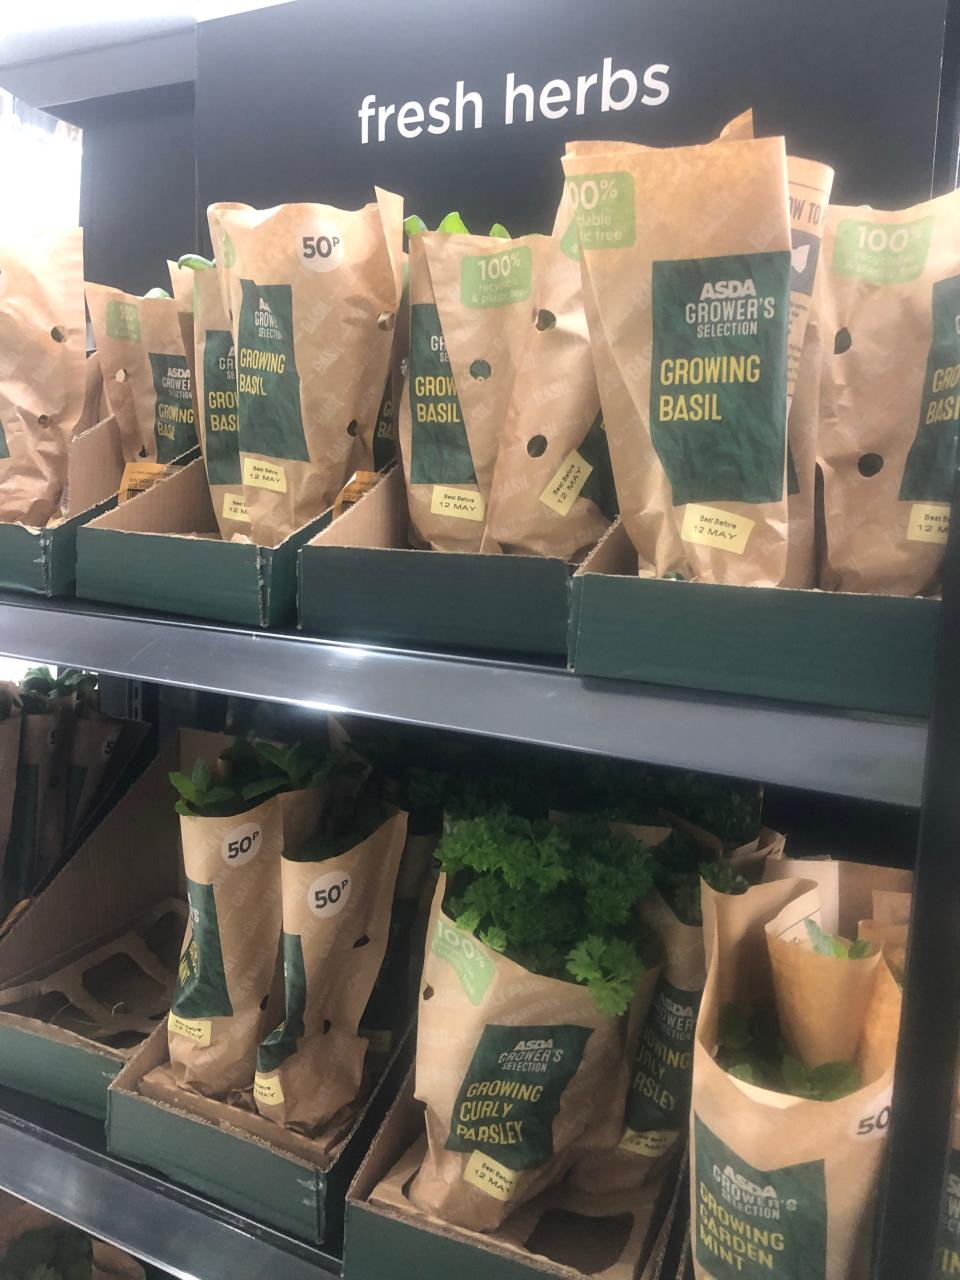 Fresh herbs sit on shelves in grocery store